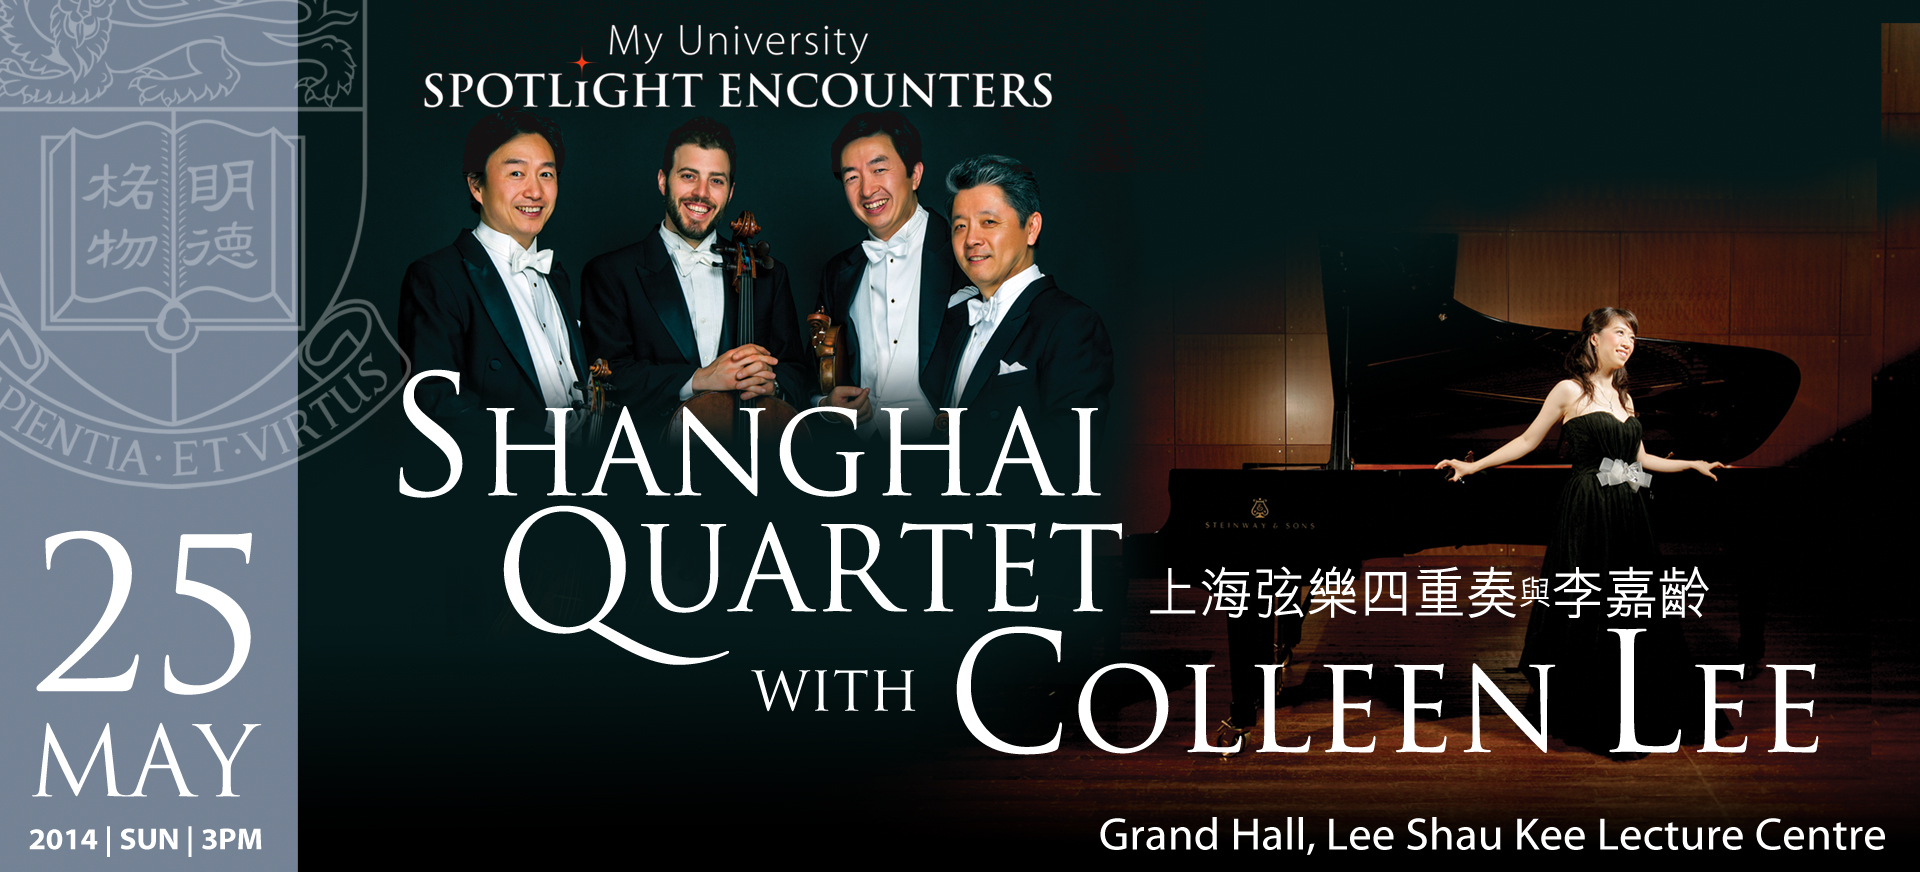 The Shanghai Quartet will perform with Hong Kong’s own Colleen Lee, presenting alluring works by Chopin, Schumann and Beethoven.